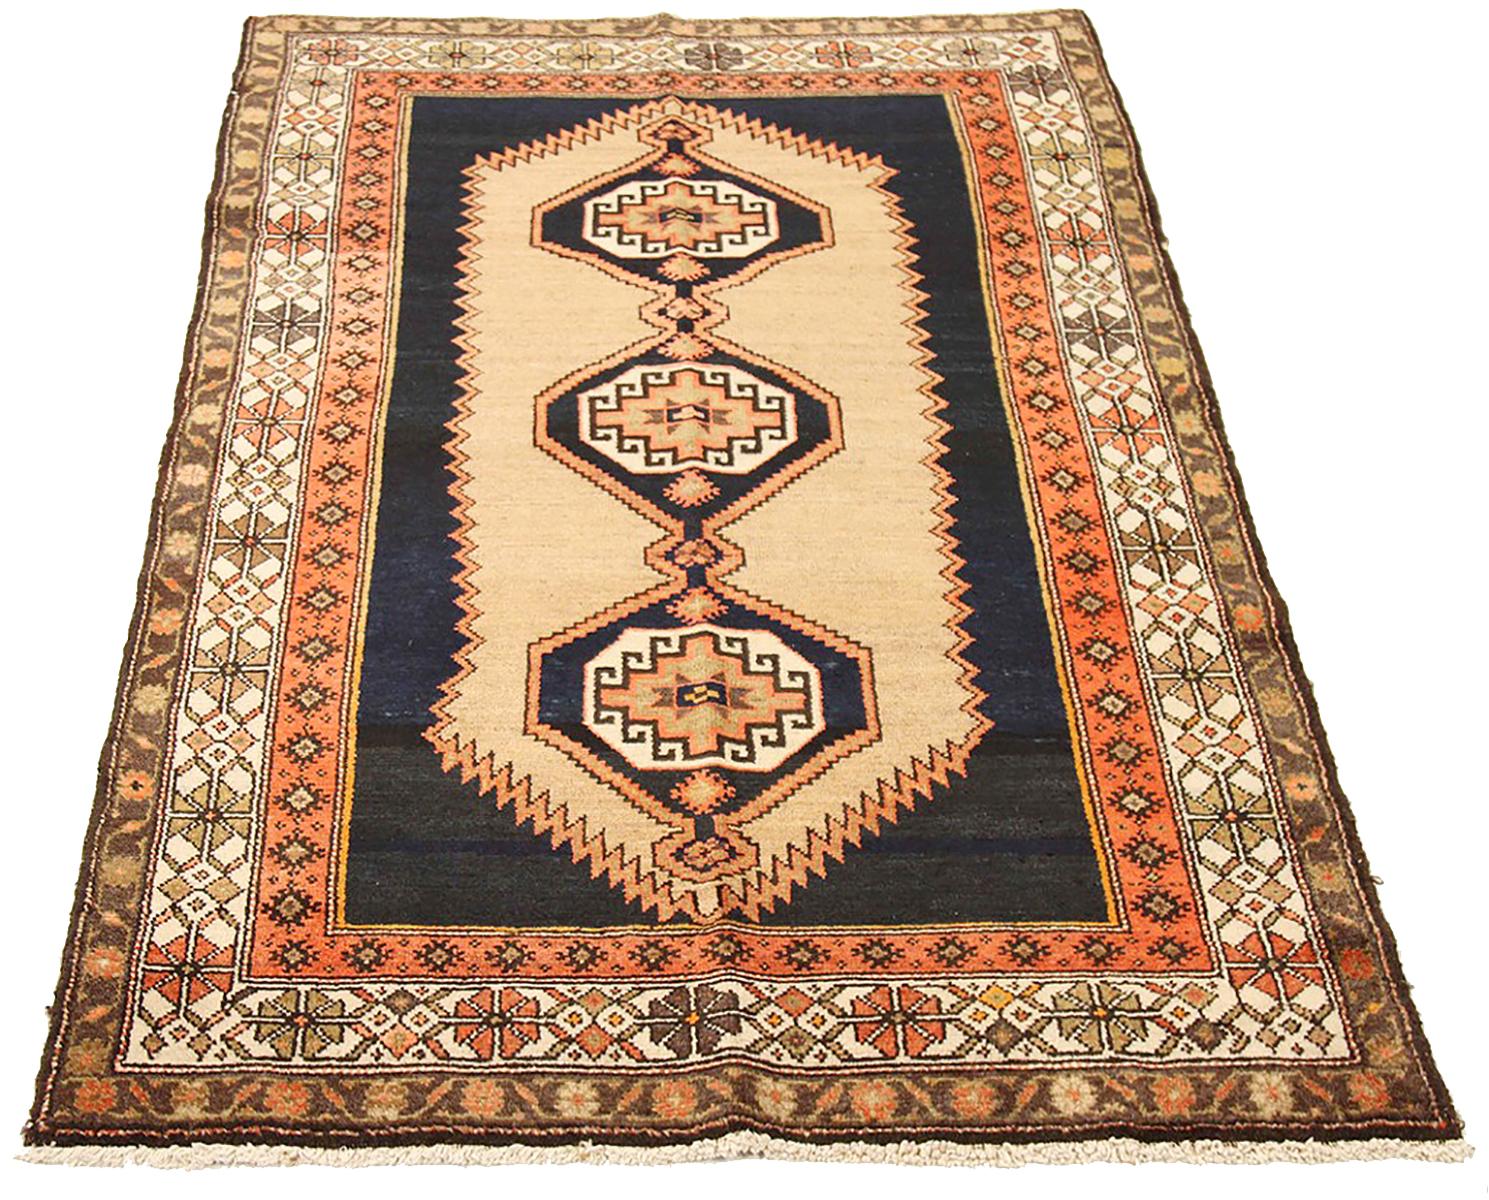 Antique Persian rug handwoven from the finest sheep’s wool and colored with all-natural vegetable dyes that are safe for humans and pets. It’s a traditional Malayer design featuring a beautiful combination of geometric details in black and beige